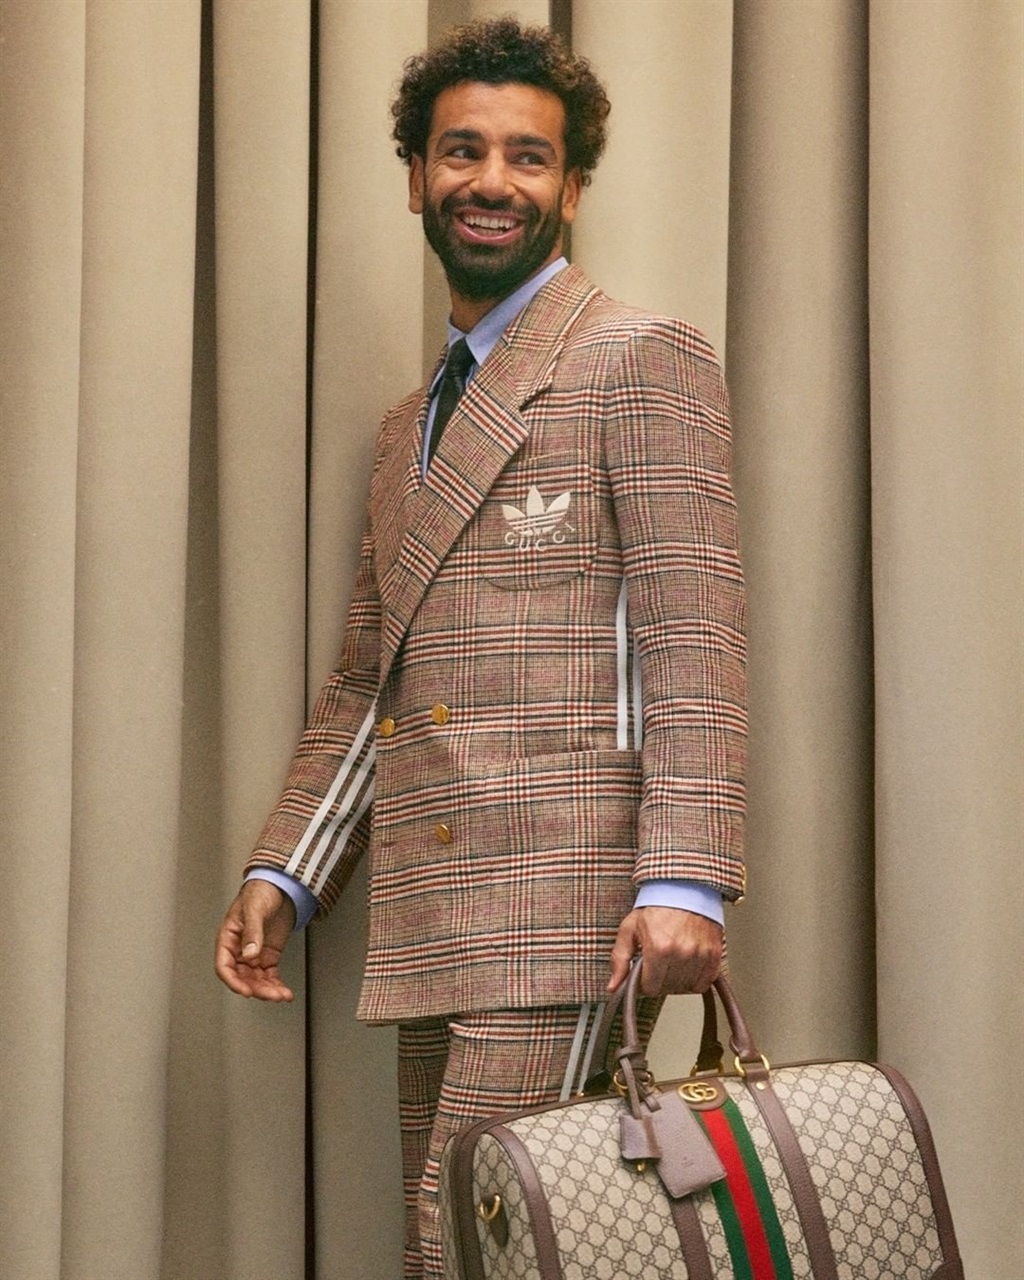 Mo Salah rocking a pricey Gucci suit for his 'A He